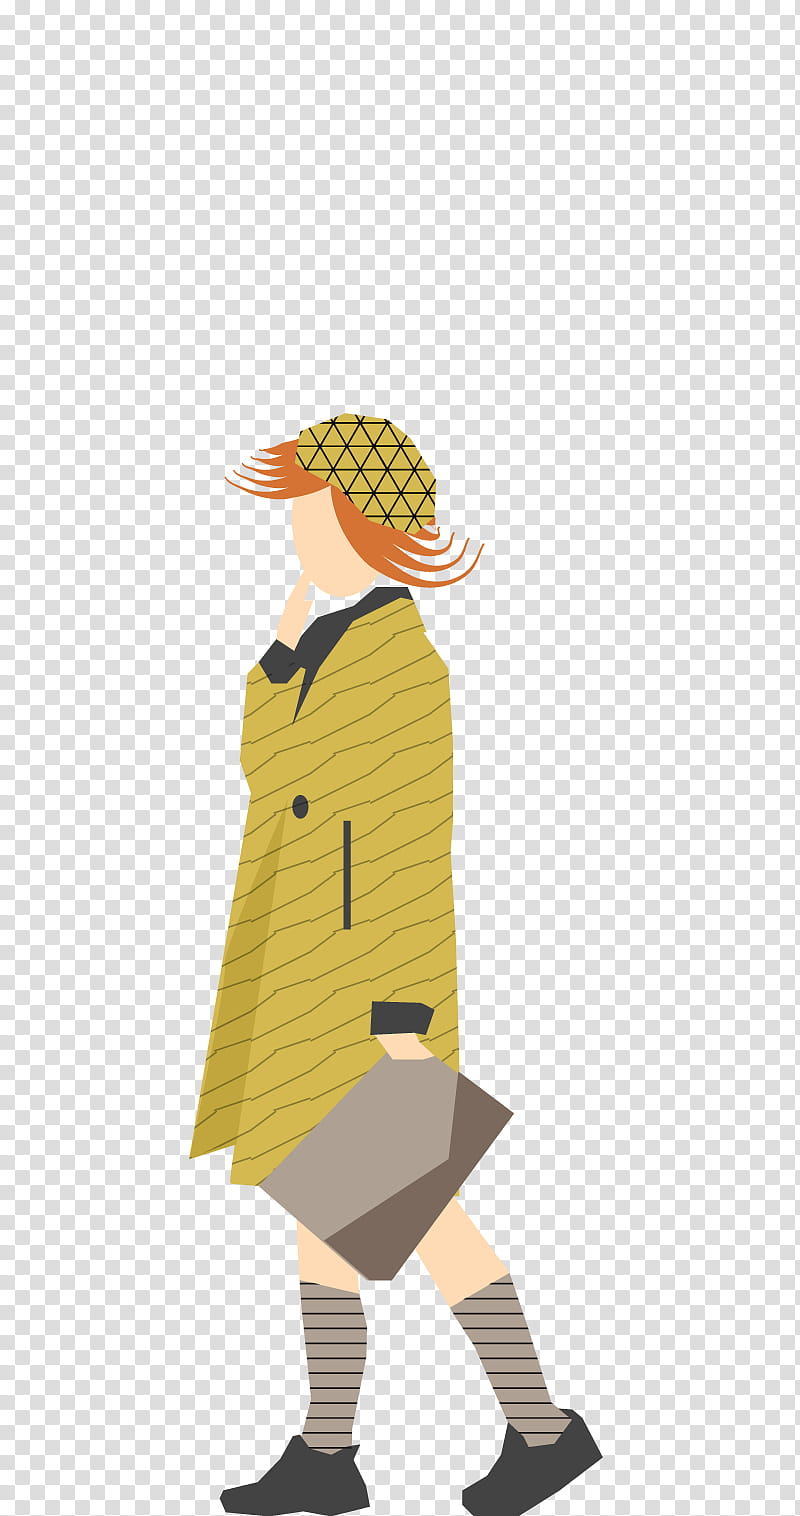 Pineapple, Architecture, Drawing, Cartoon, Character, Collage, Architectural Drawing, Cutout Animation transparent background PNG clipart